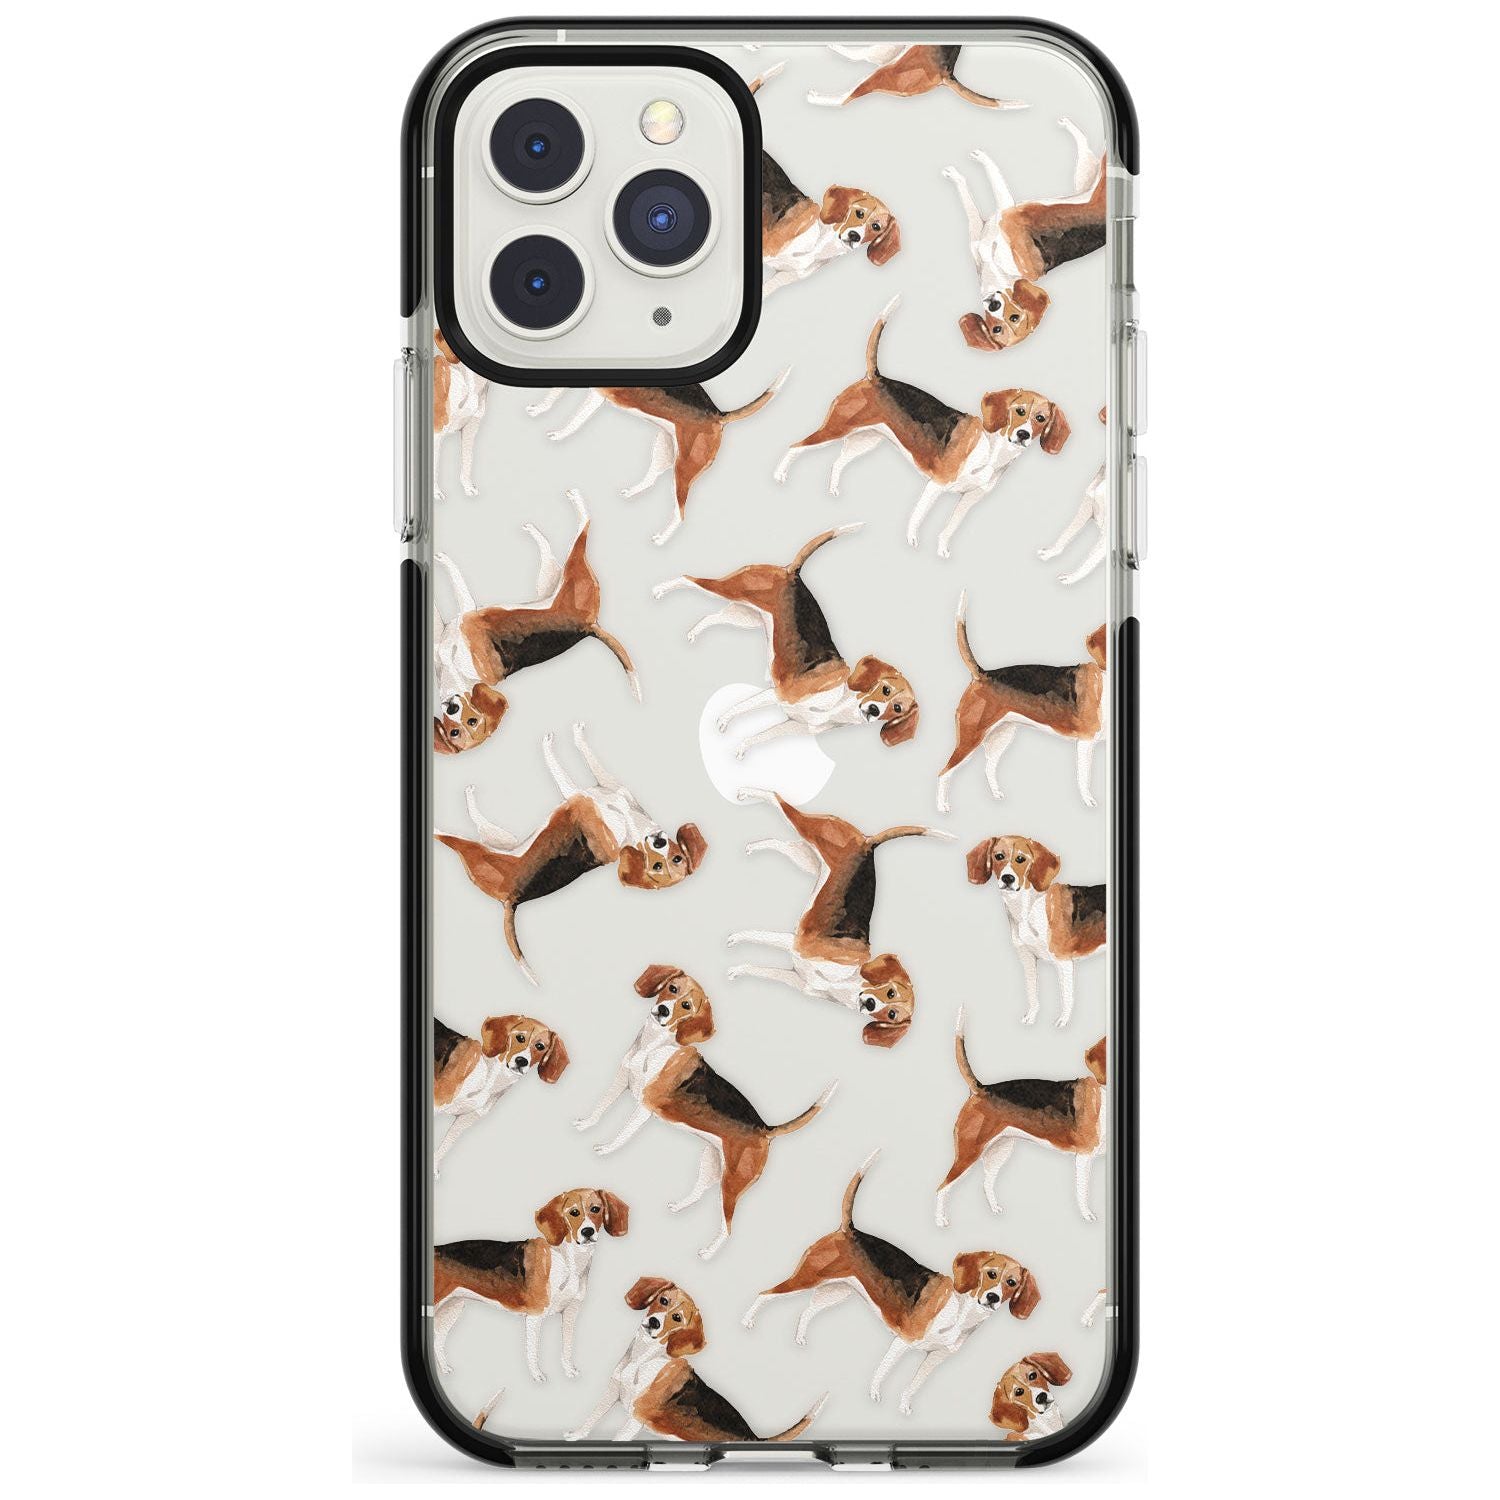 Beagle Watercolour Dog Pattern Black Impact Phone Case for iPhone 11 Pro Max